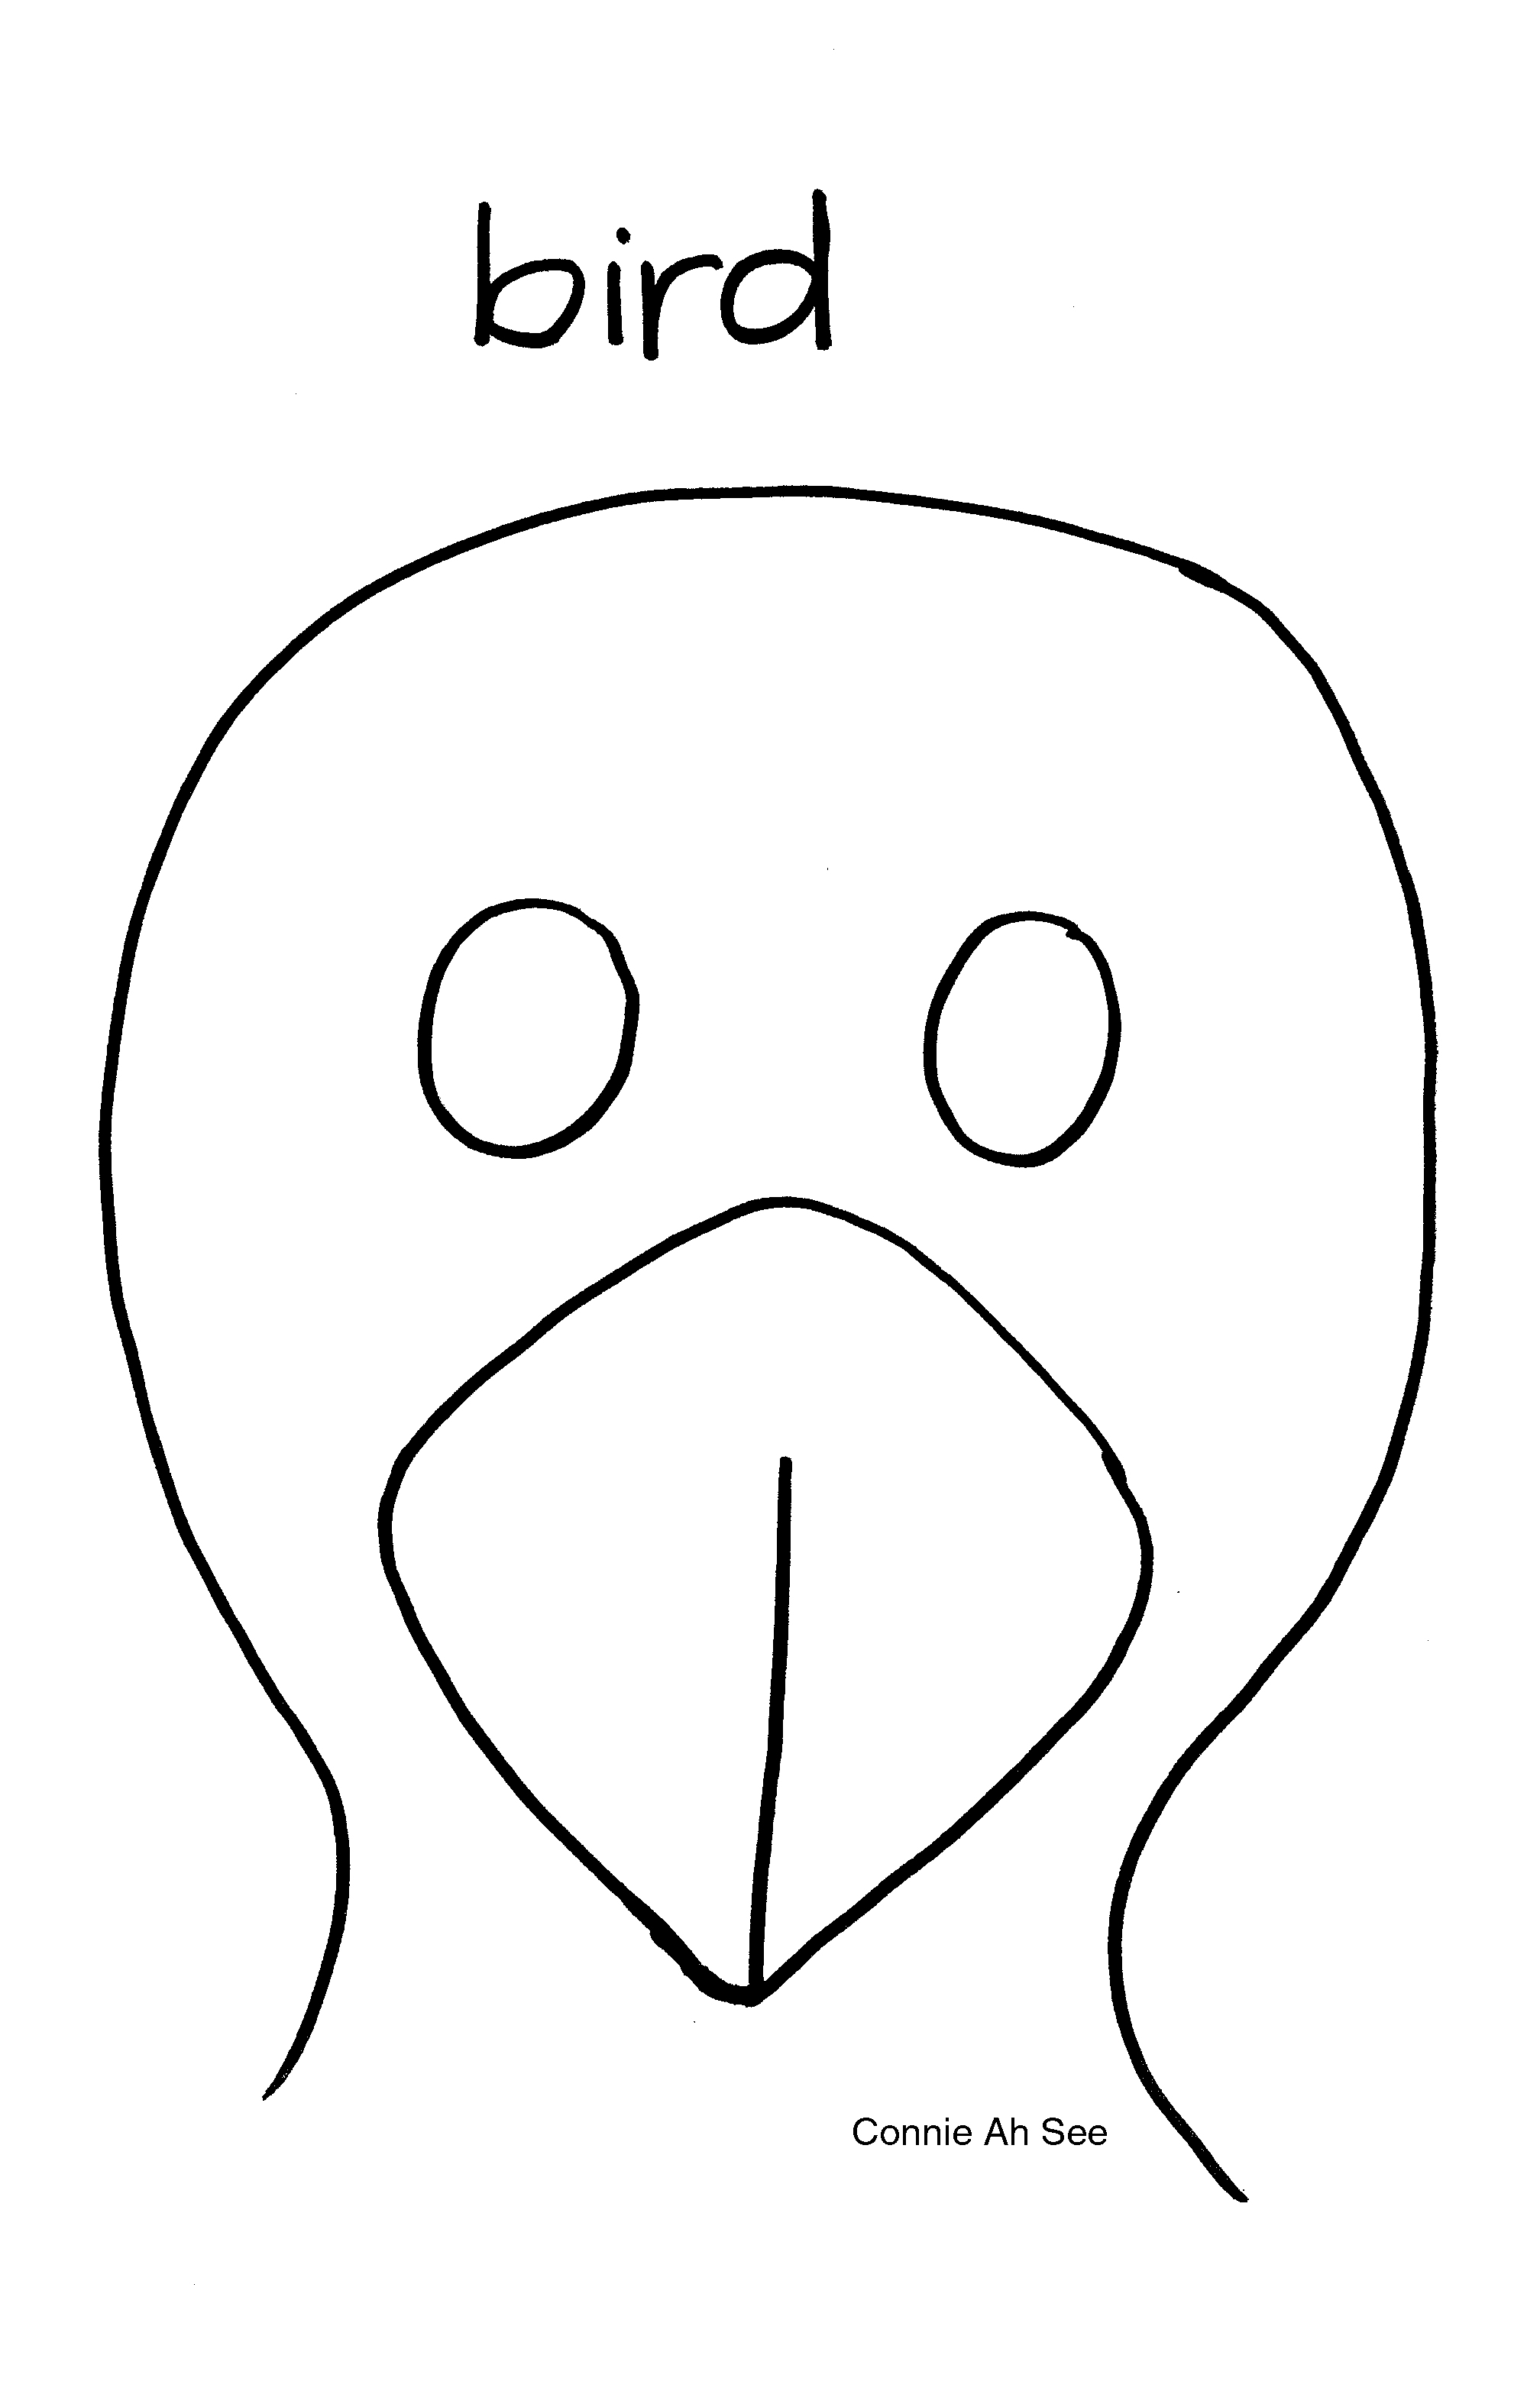 Blank Face Coloring Page Getcoloringpages Mask Templates - Animal Face Masks Printable Free